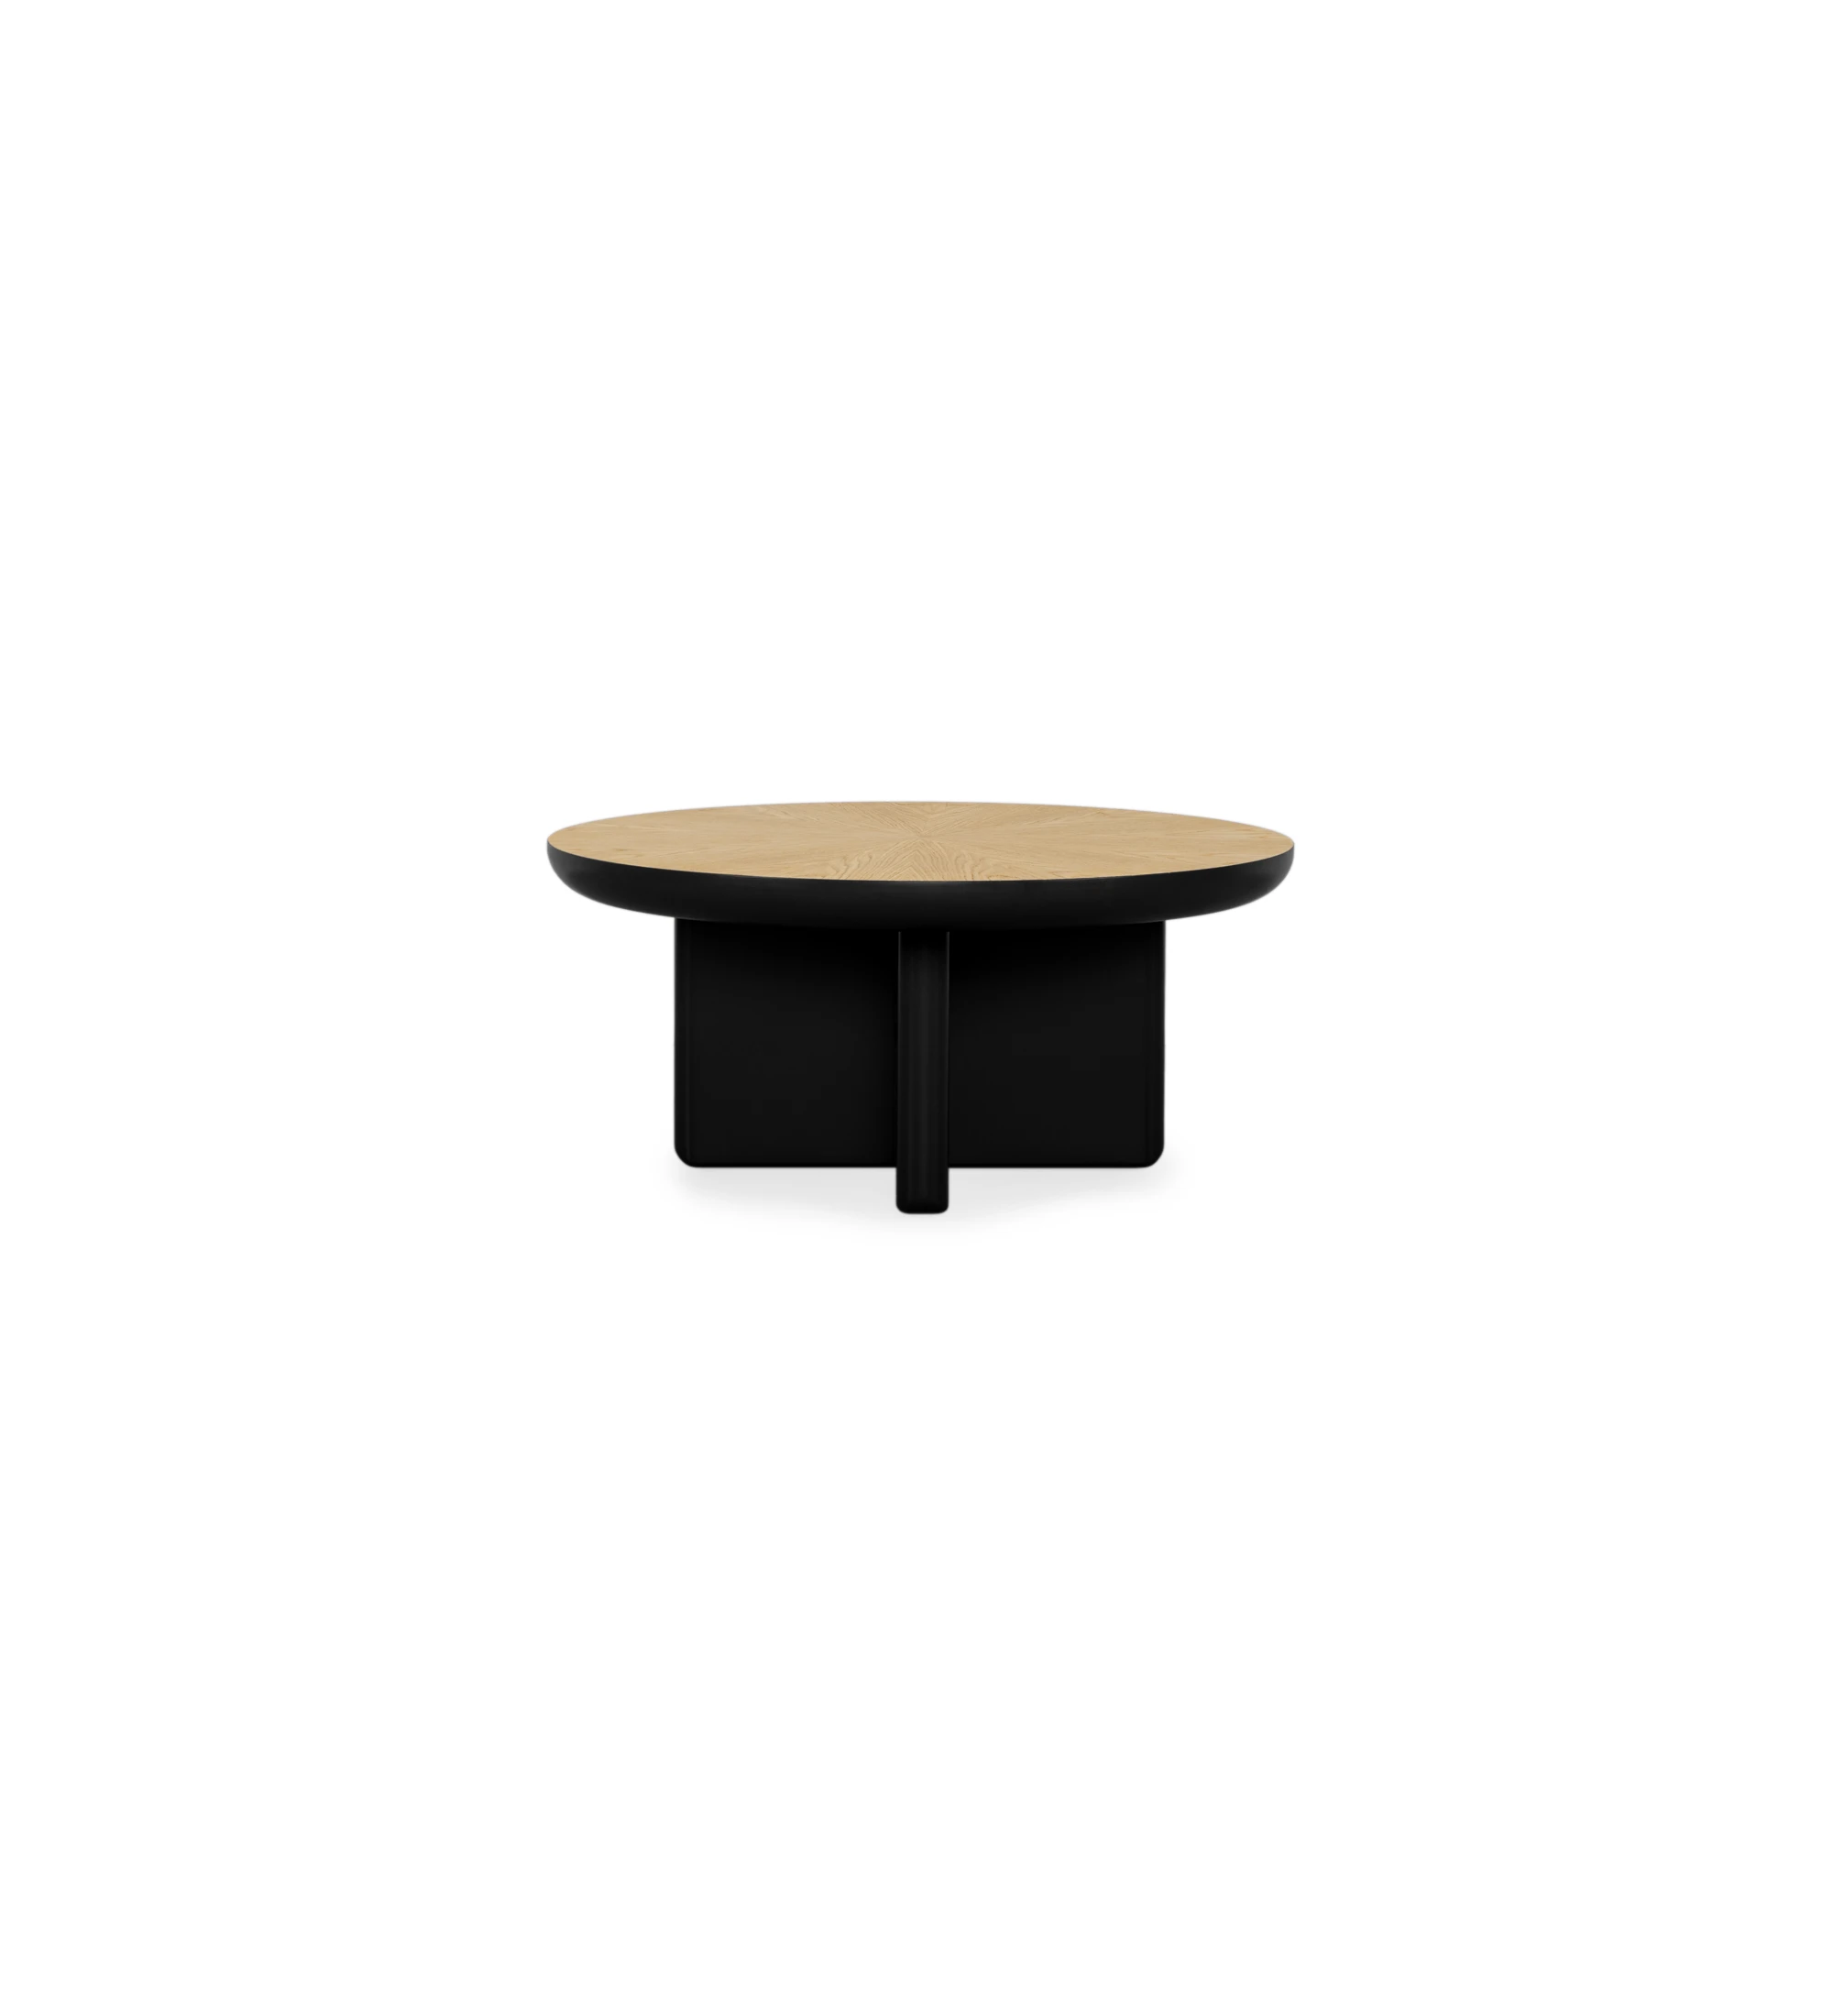 Mónaco round center table in black lacquer with natural oak veneer top, Ø 75 cm.